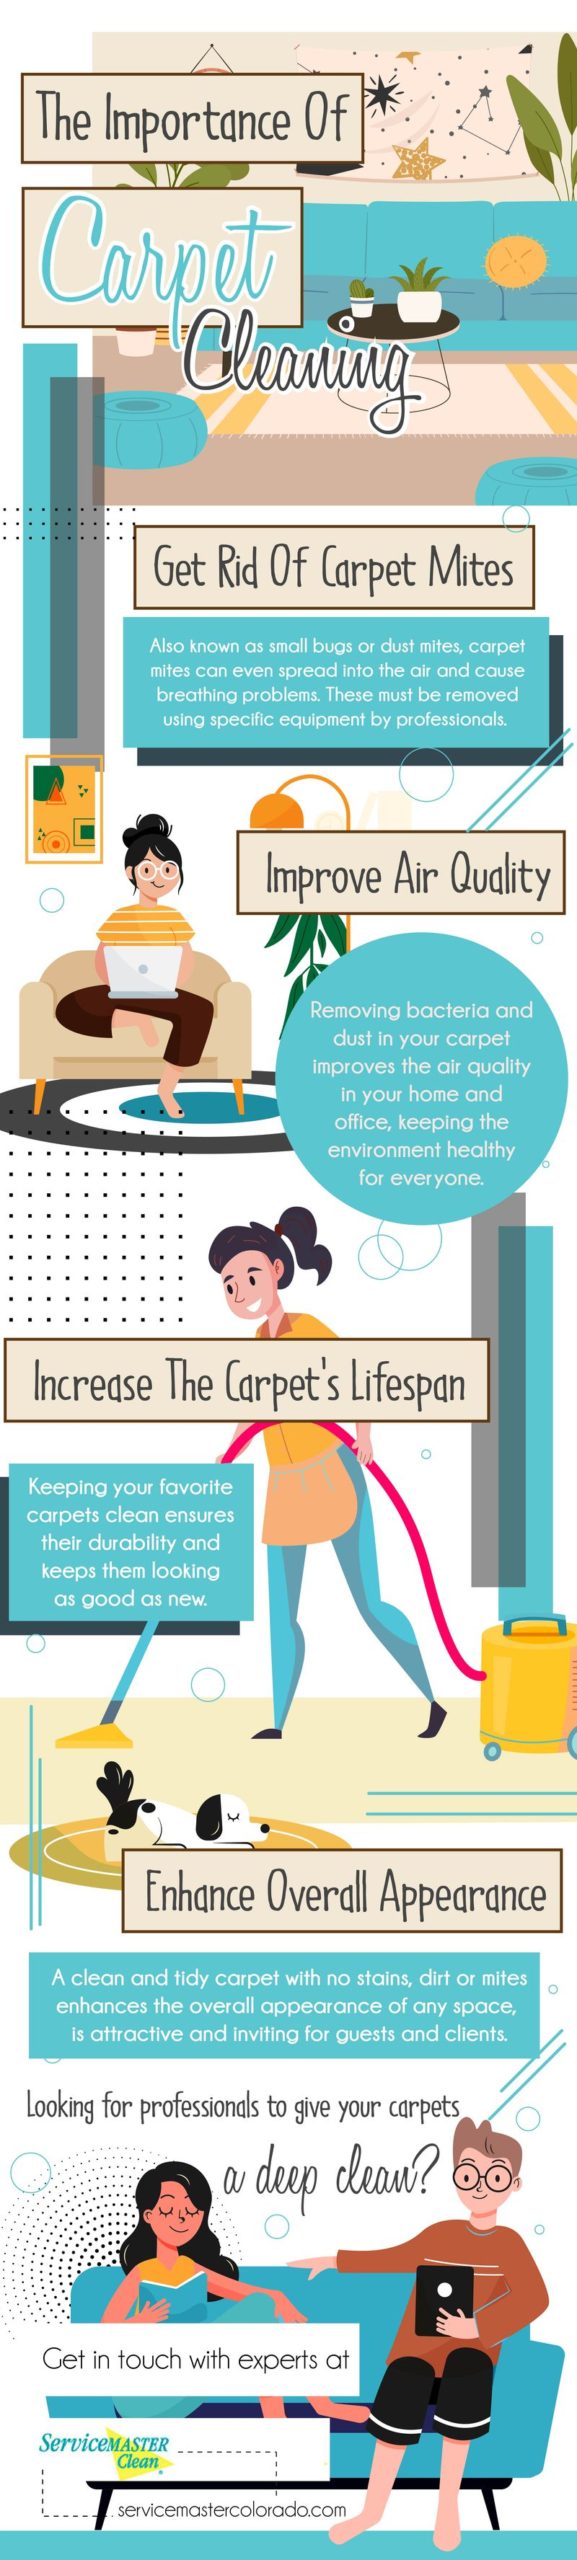 The Importance Of Carpet Cleaning